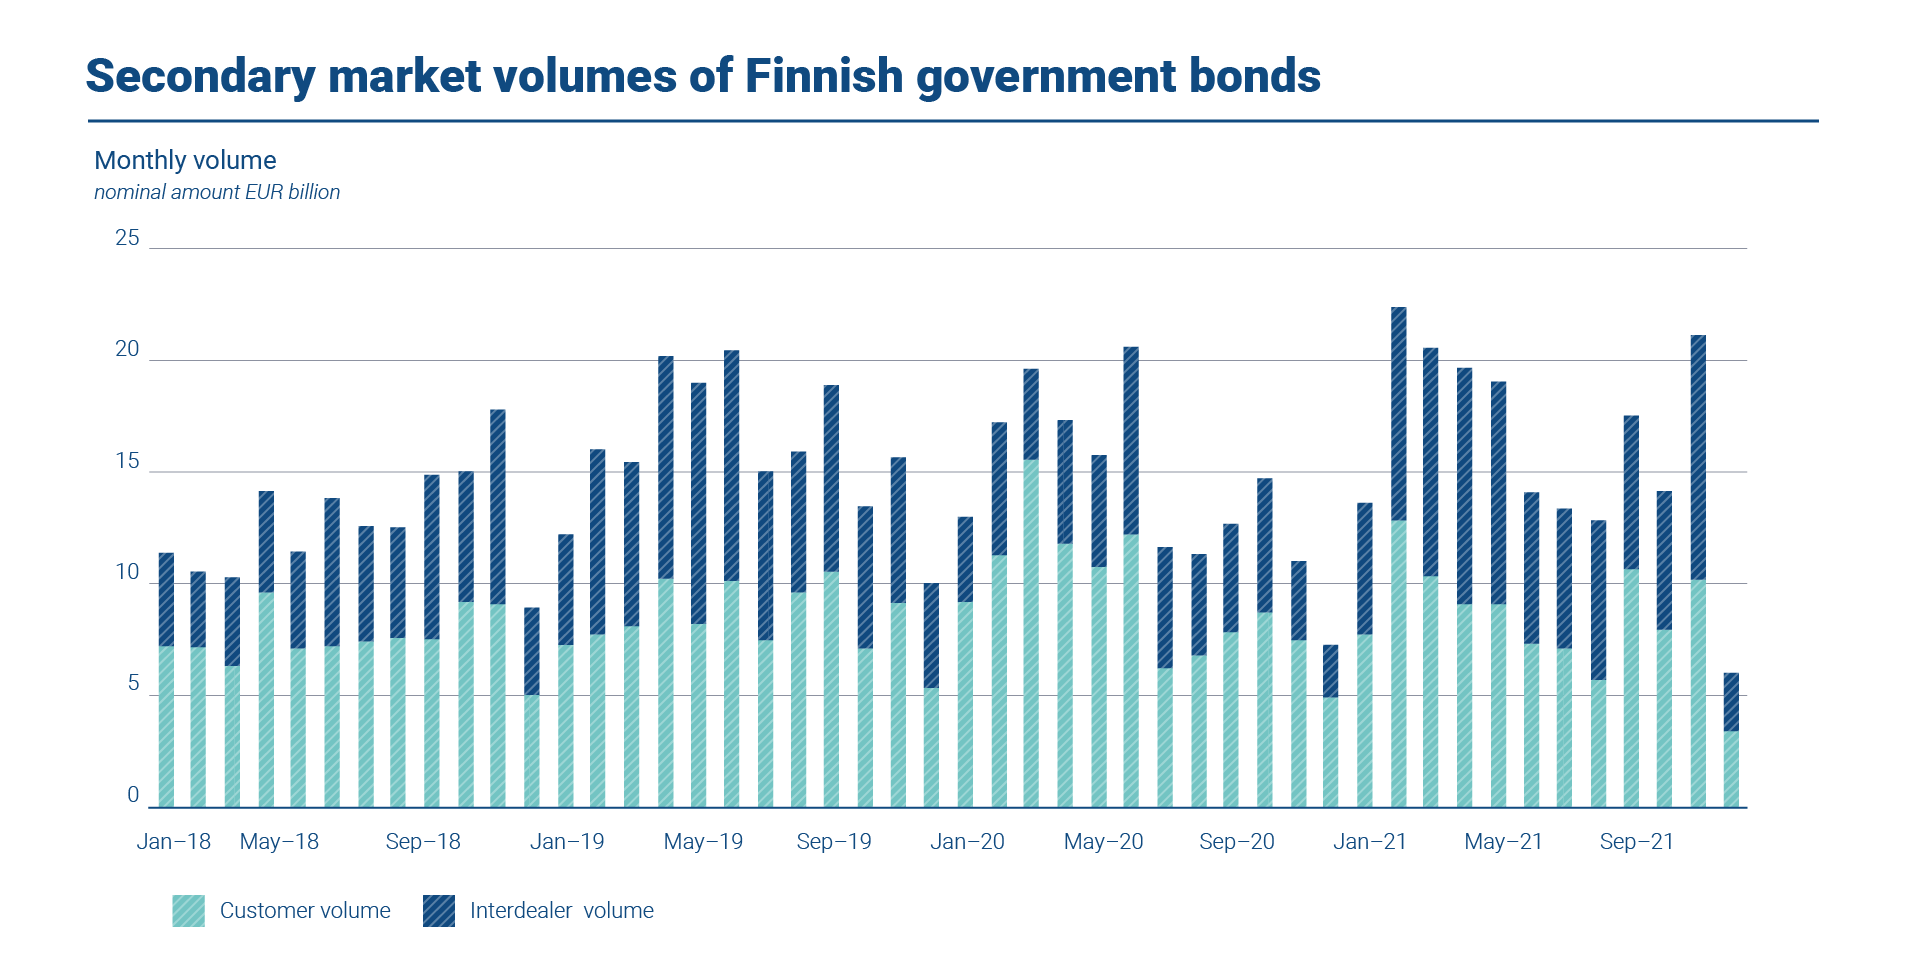 The graph shows the secondary market volumes of Finnish government bonds in 2018-21. In 2021, the nominal interdealer trading volume was on average EUR 7,74 billion per month. The average monthly customer volume was EUR 8,48 billion.